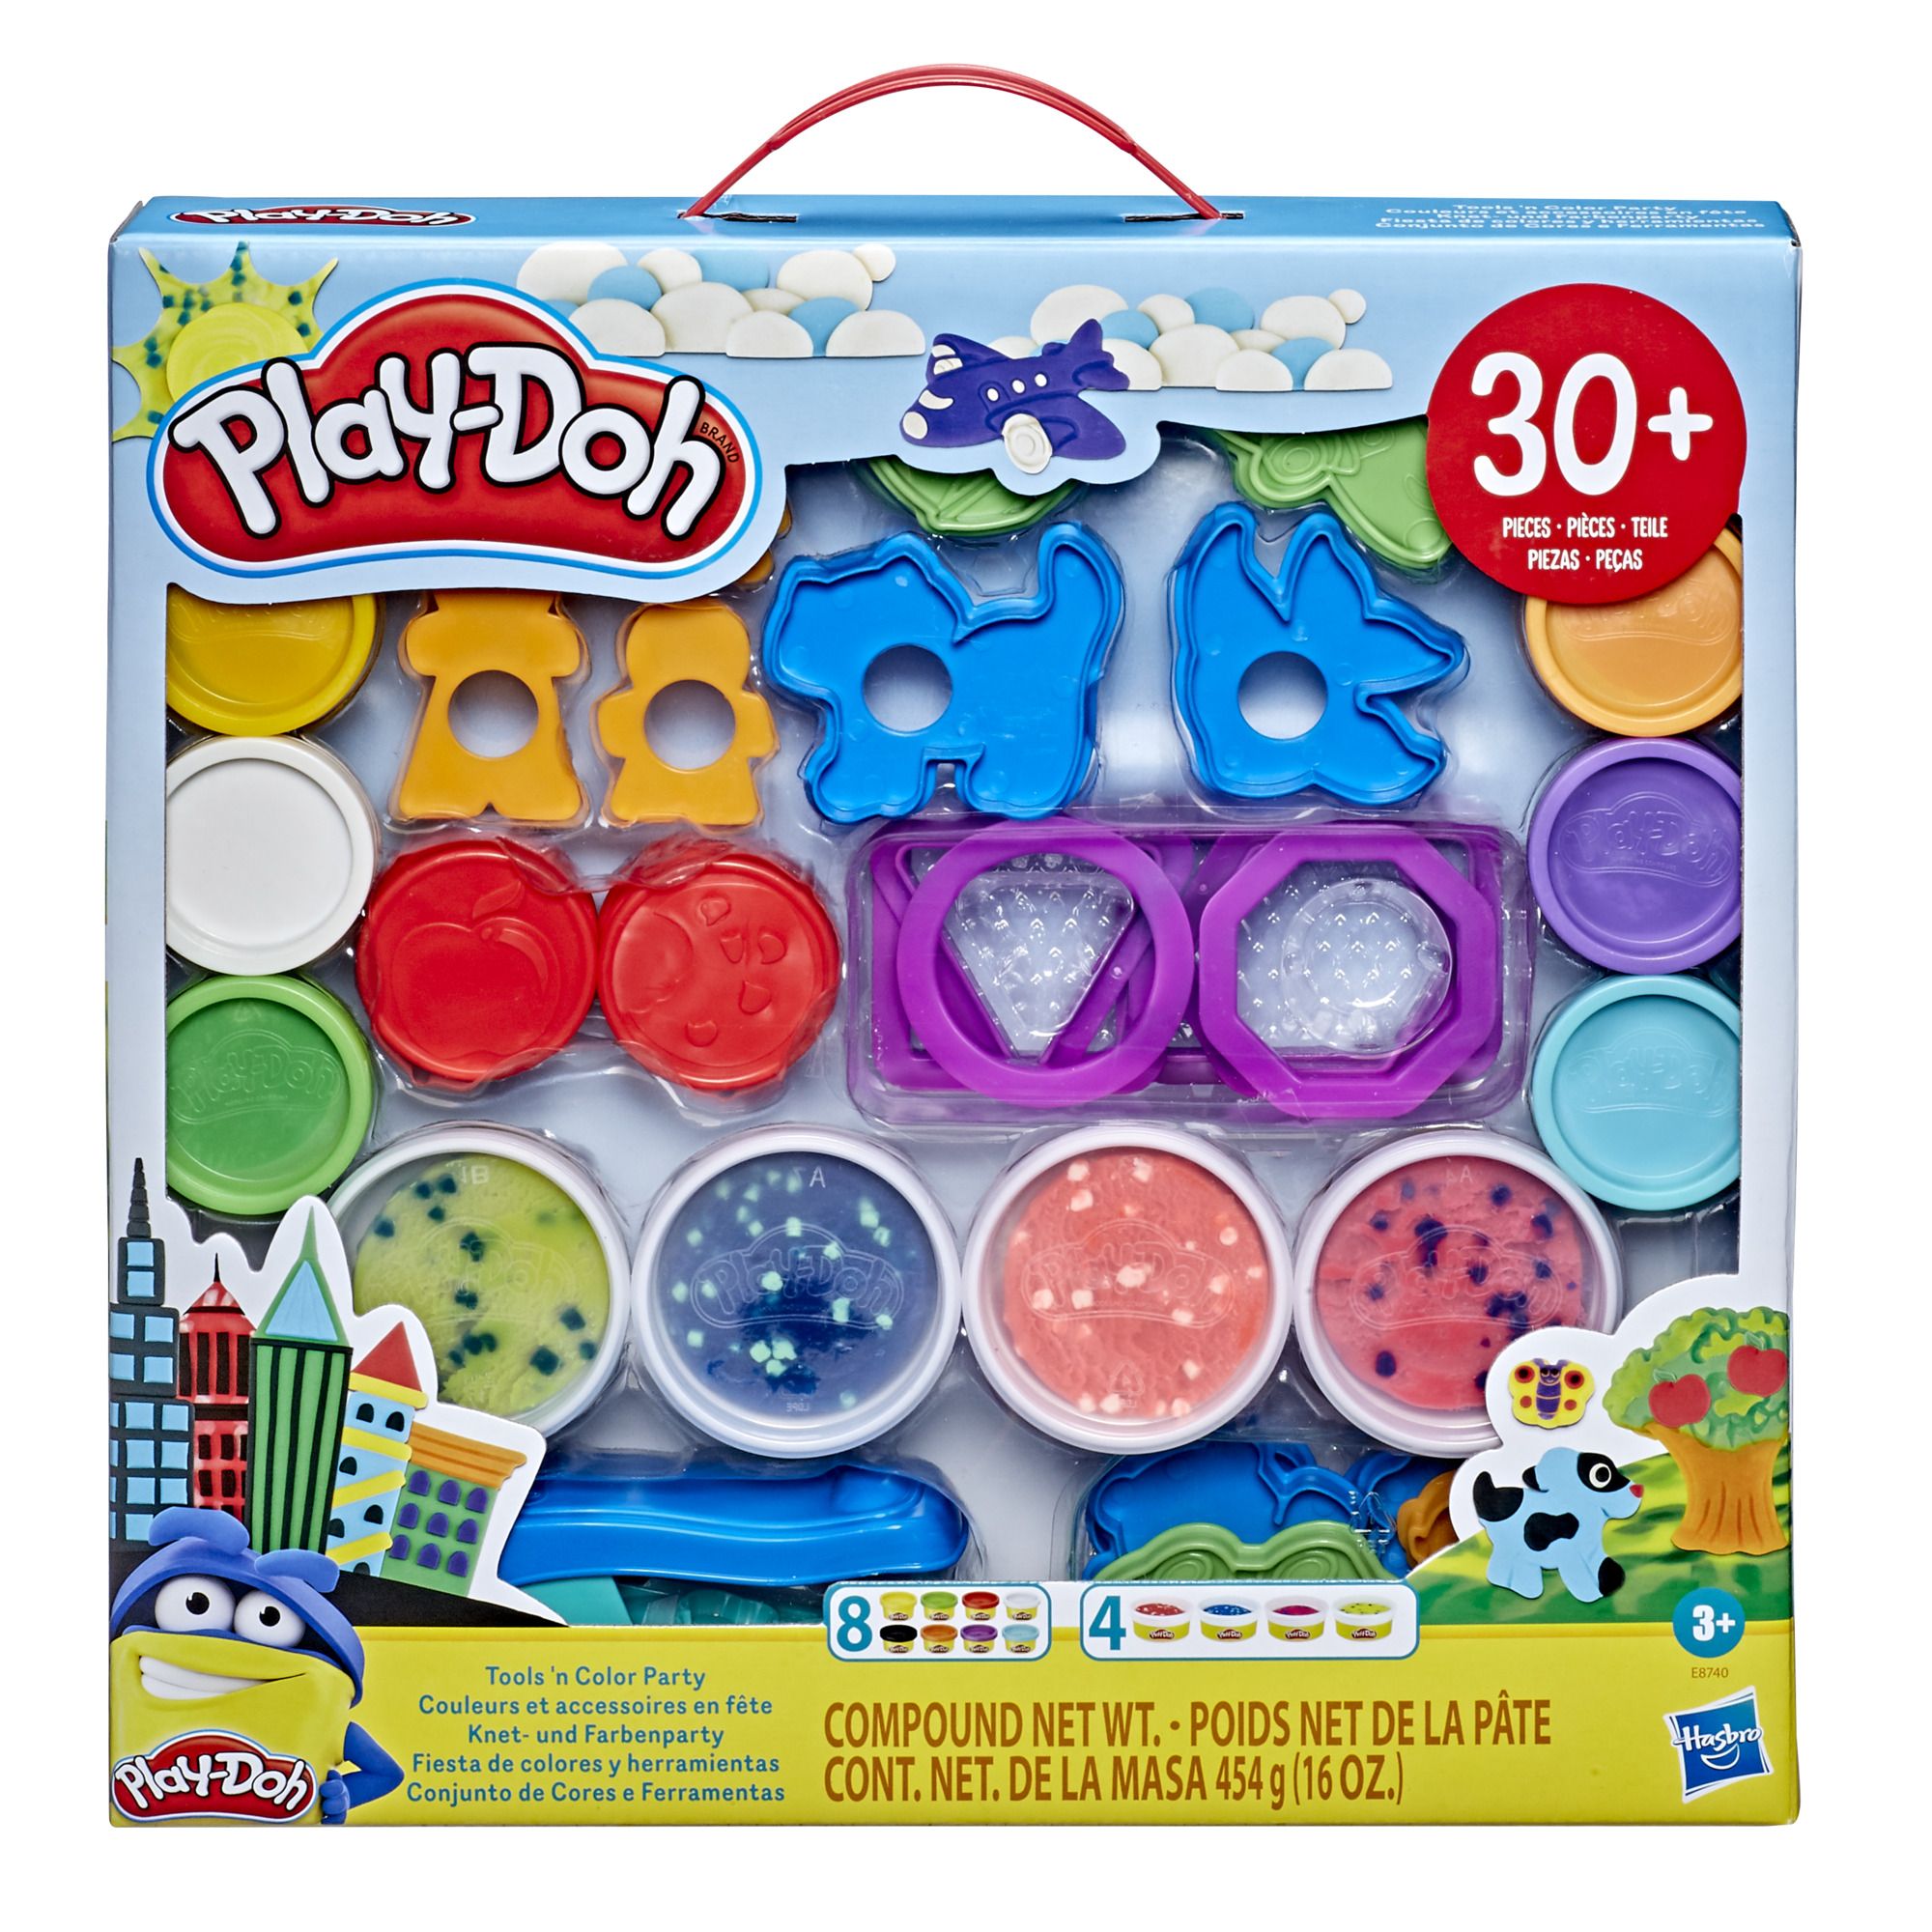 Play-Doh Shapes Playhouse Playset 6 Pay-Doh Colors + 9 Shapes